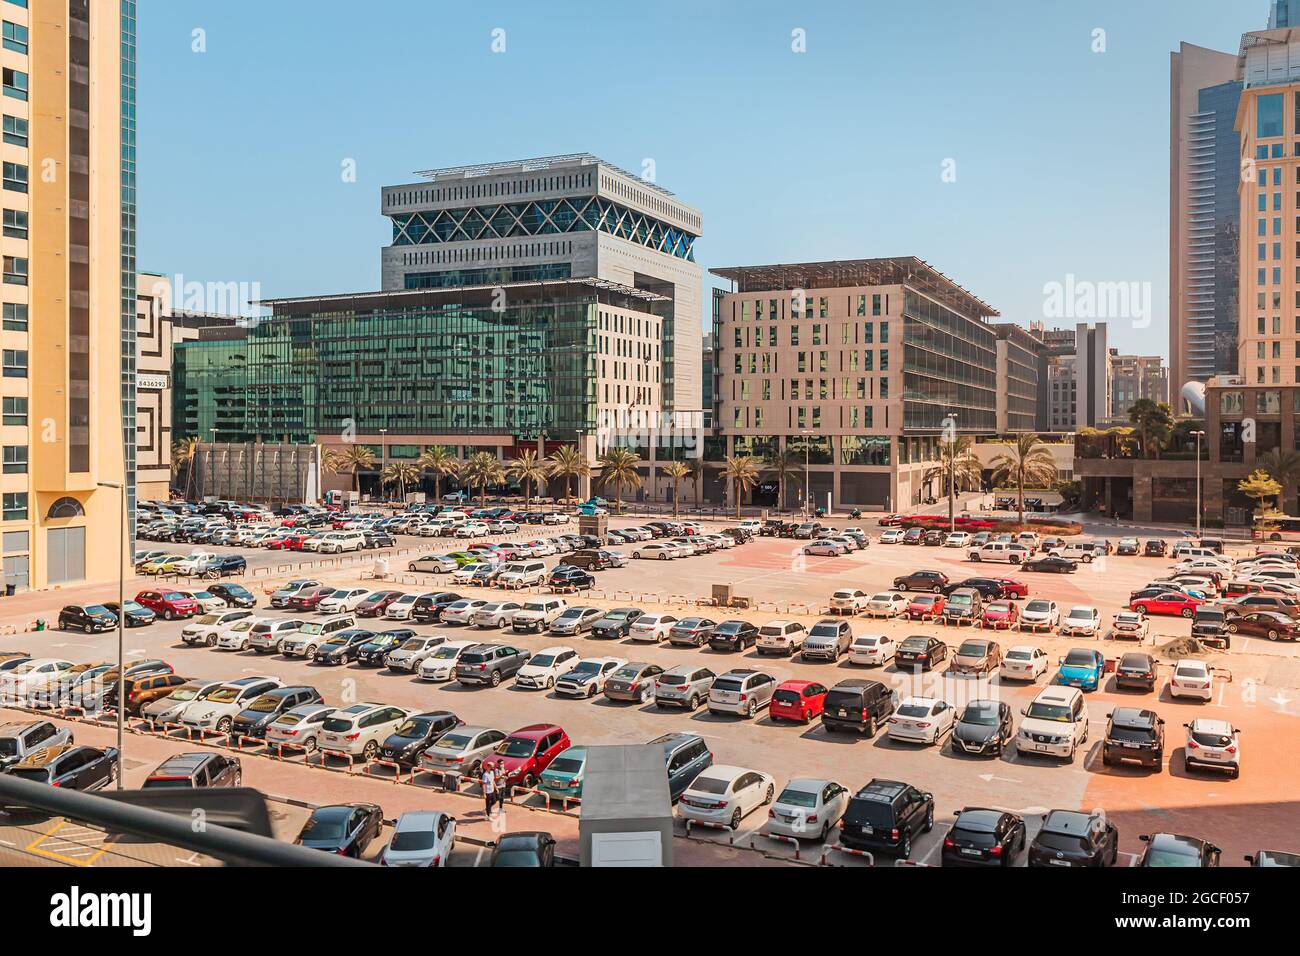 24 February 2021, Dubai, UAE: Large filled open-air parking lot with hundreads of cars near the hotel and business center in Dubai Stock Photo